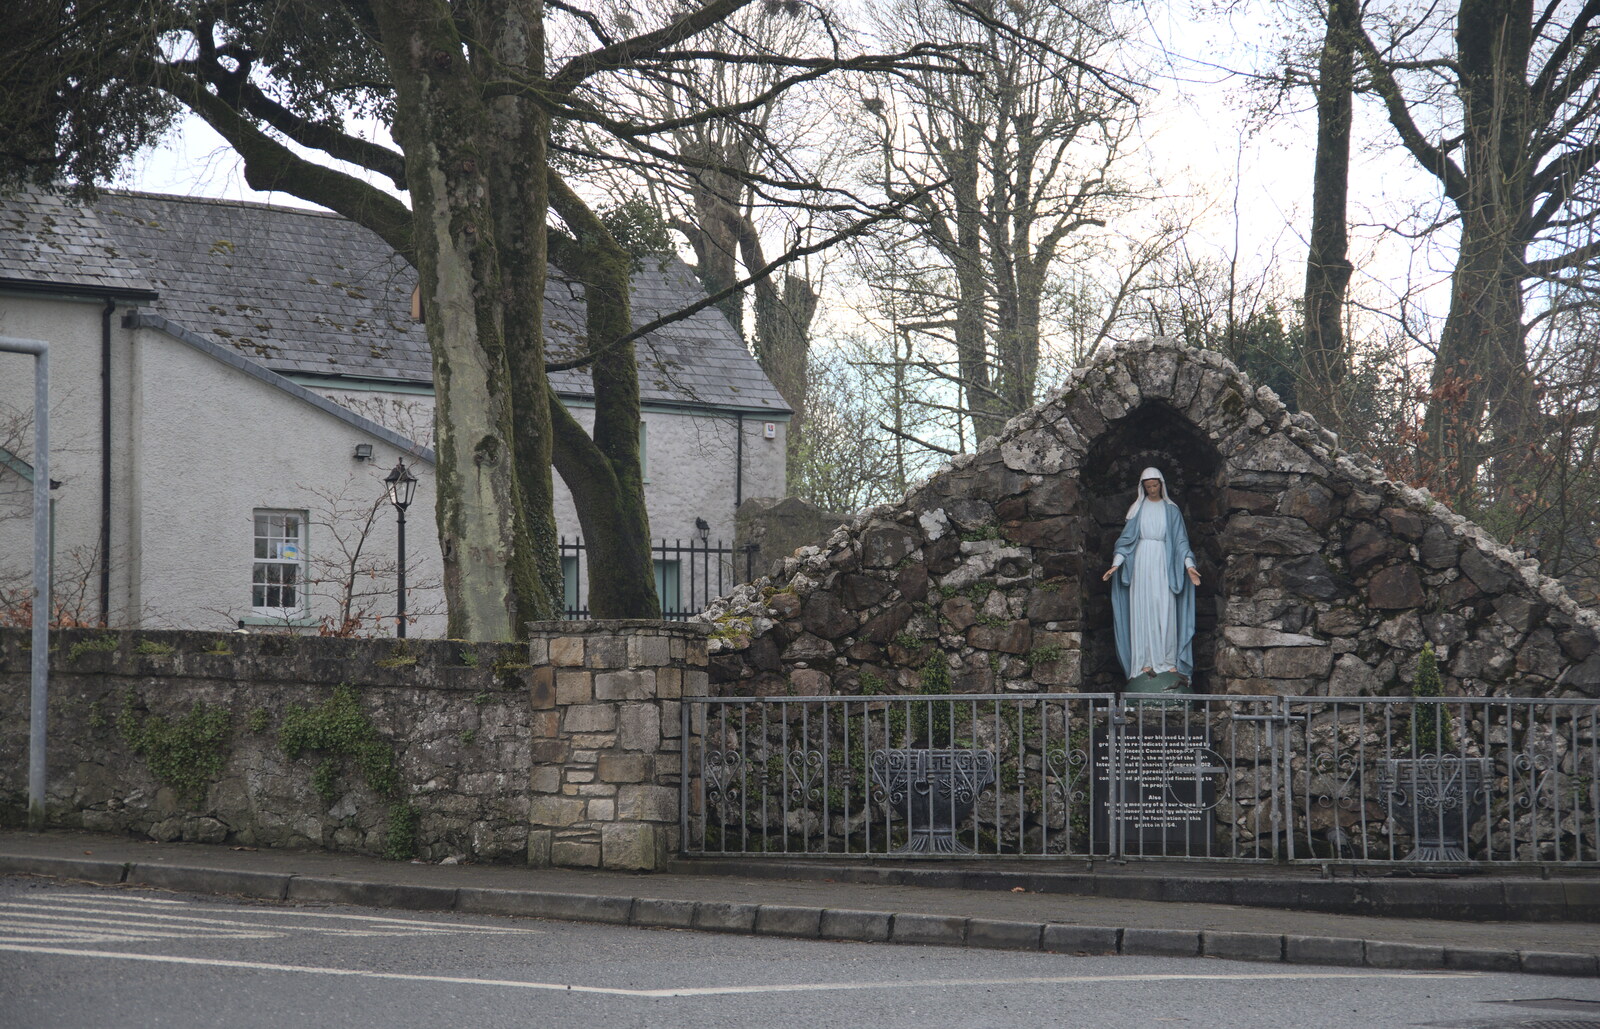 A Scary Mary on the way to Manorhamilton from Manorhamilton and Bundoran, Leitrim and Donegal, Ireland - 16th April 2022